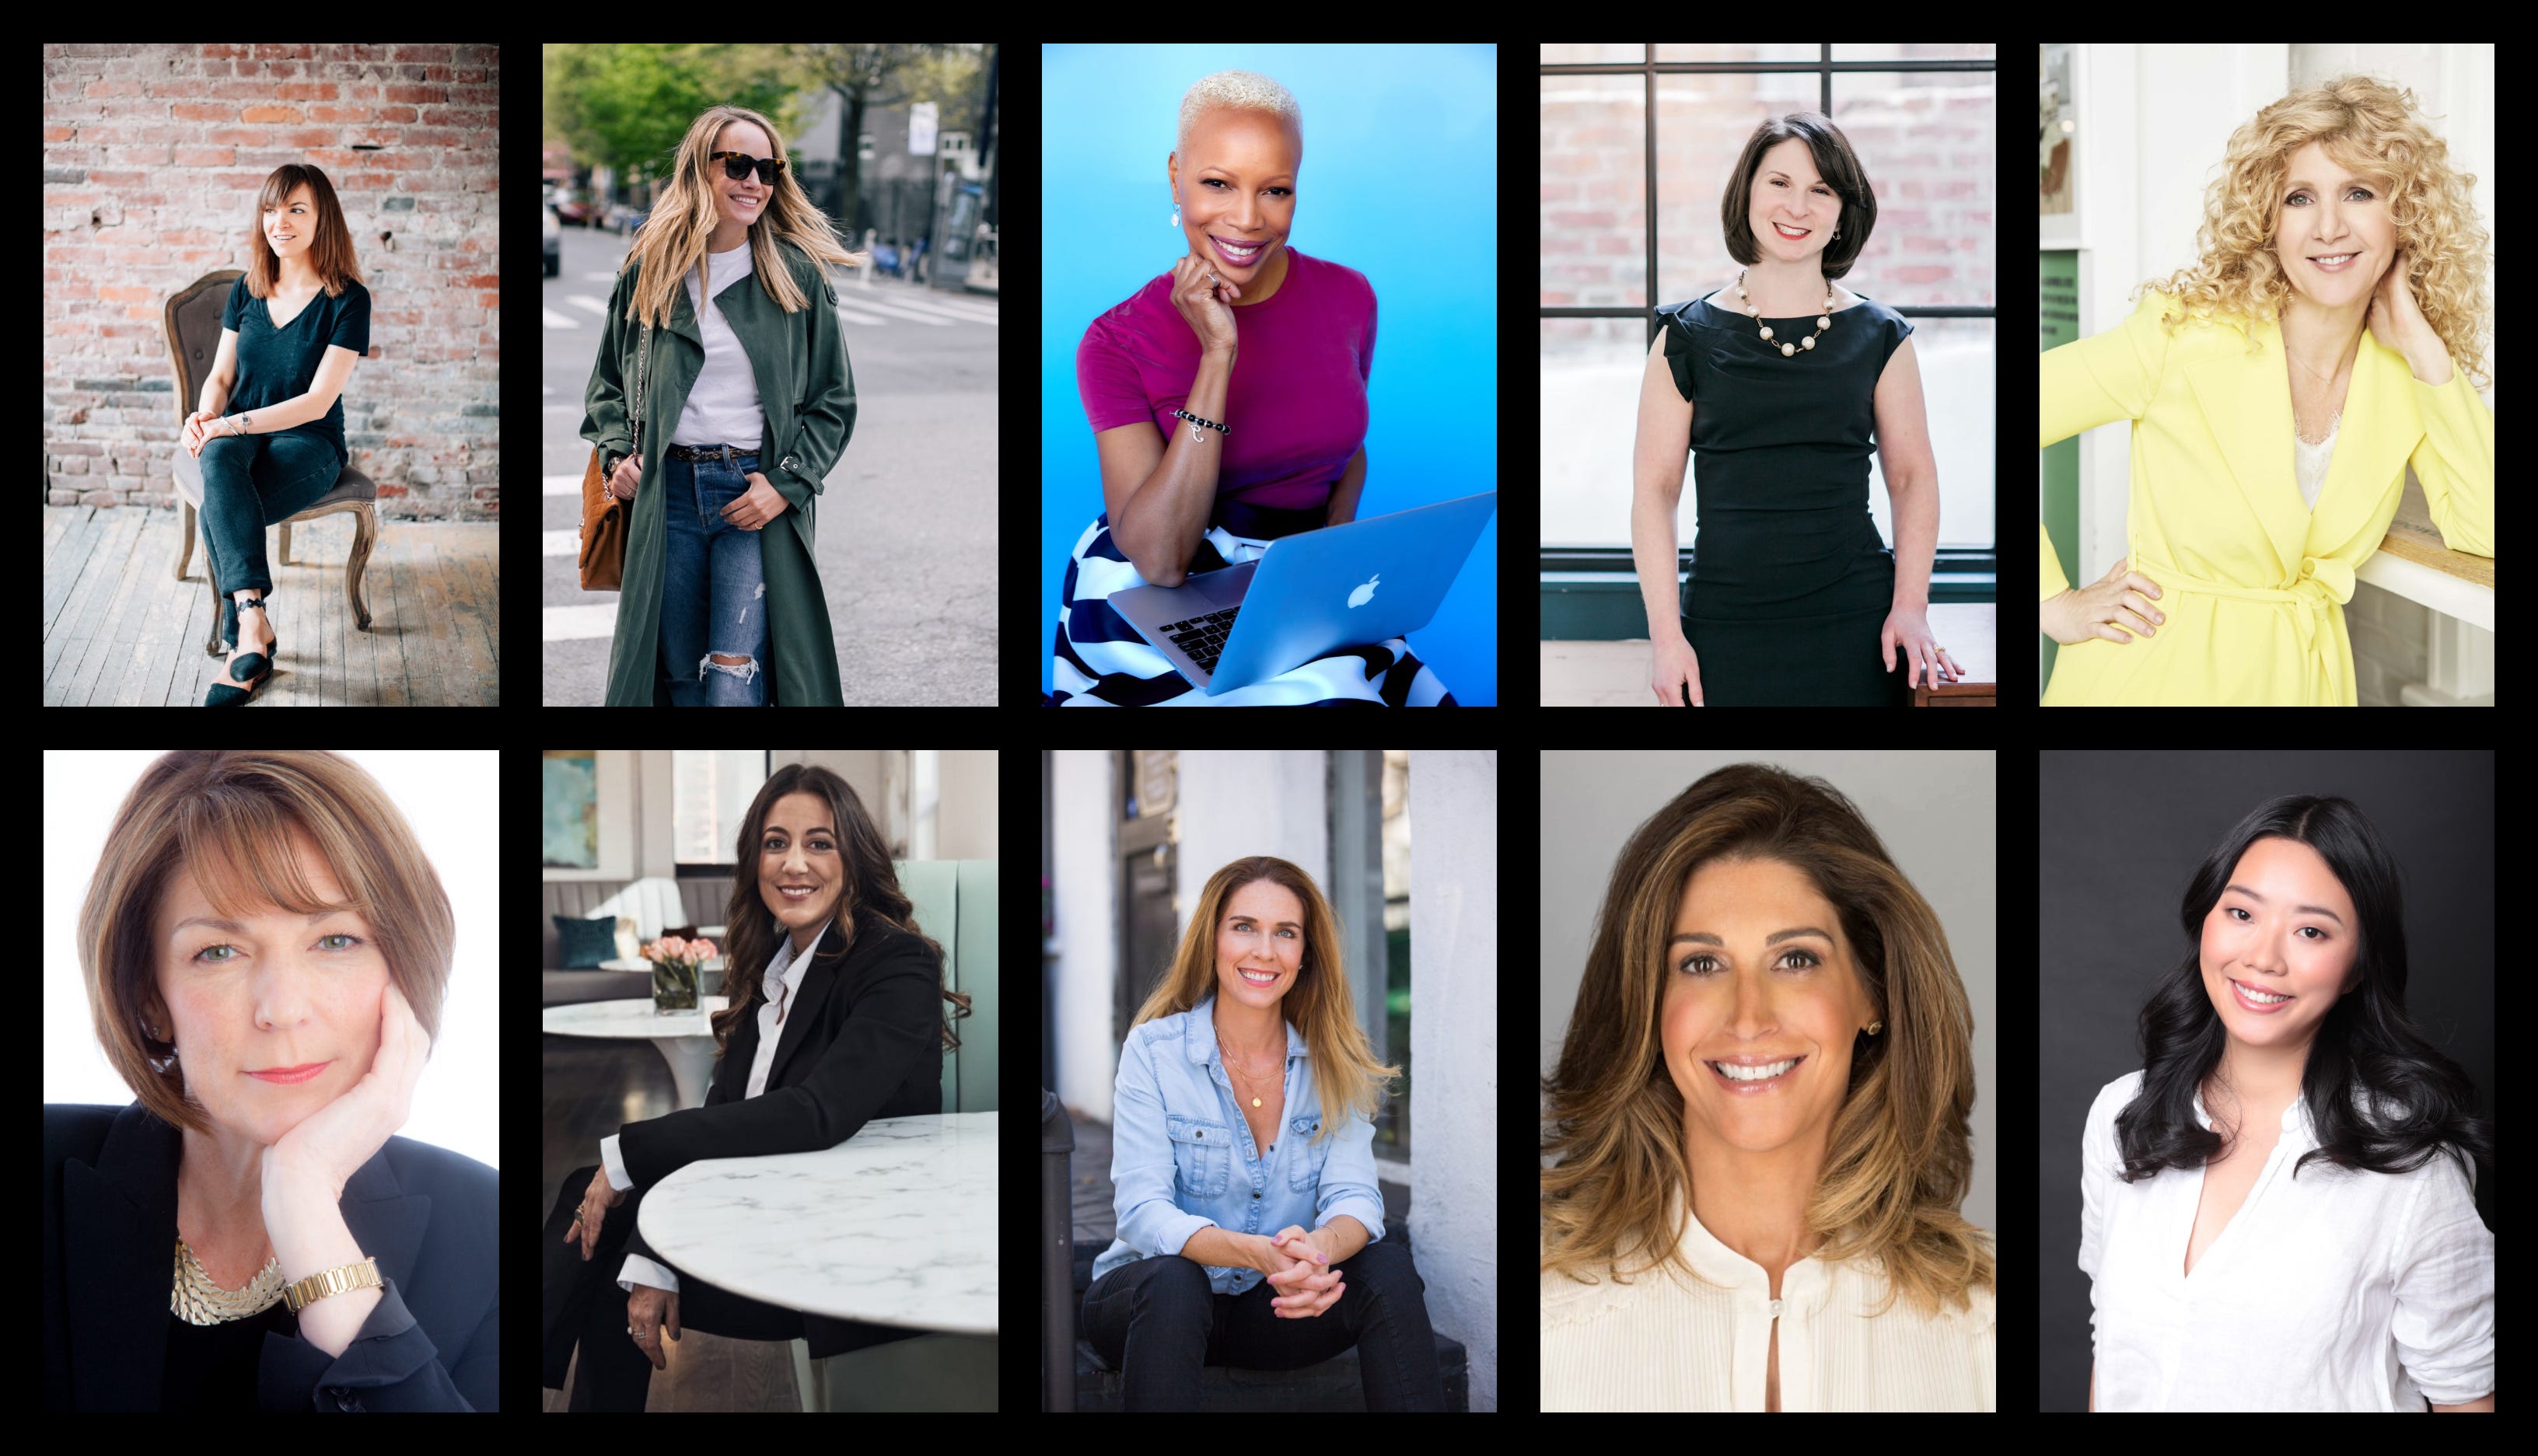 10 Prominent Women Leaders Share What We Each Need To Do To Close The Gender Wage Gap by Candice Georgiadis Authority Magazine Medium